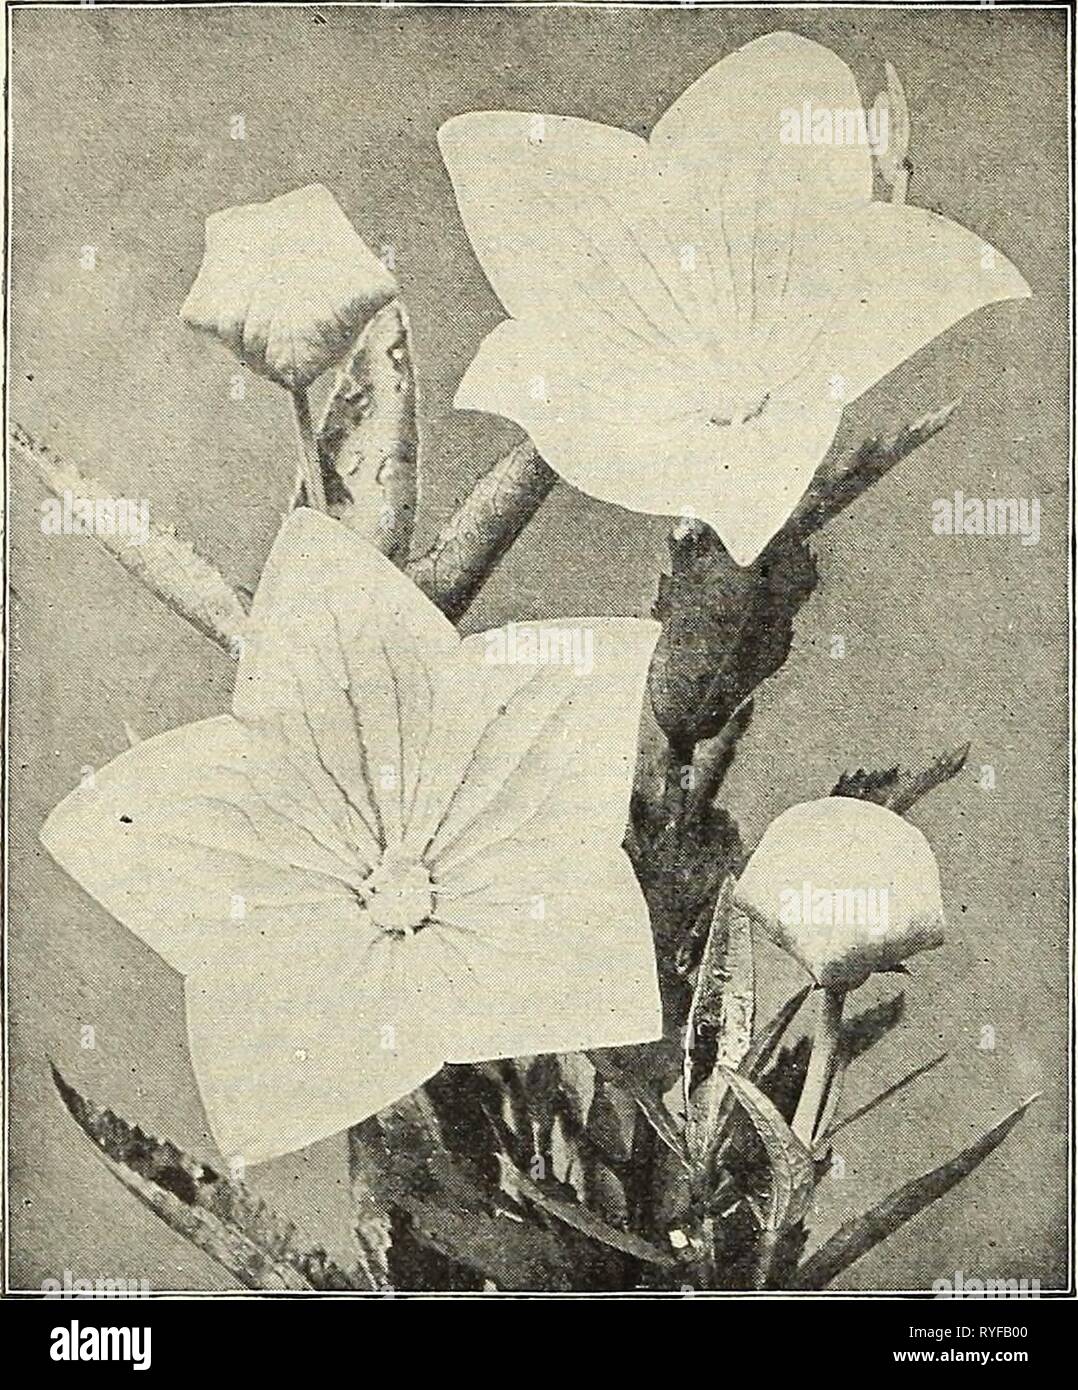 Dreer's wholesale price list : flower seeds for florists plants for florists bulbs for florists vegetable seeds fertilizers, fungicides, insecticides, implements, etc  dreerswholesalep1924henr Year: 1924  66 HENRY A. DREER, PHILADELPHIA, PA., WHOLESALE PRICE LIST    Platycodon Grandifloram Platycodon (Japanese Bell Flower) Perdoz. Orandiflora. Blue. Two-year-old roots. .. $150 ' White. Two-year-old roots. ISO Plumbago (Lead Wort) Larpentse. Strong plants, 3-inch pots.... 150 Polemonium (Jacob's Ladder) Reptaiis. 3-inch pots 1 75 Richardsoiii. 3-inch pots 1 75 ' Alba. 3-inch pots 175 Potentilla Stock Photo